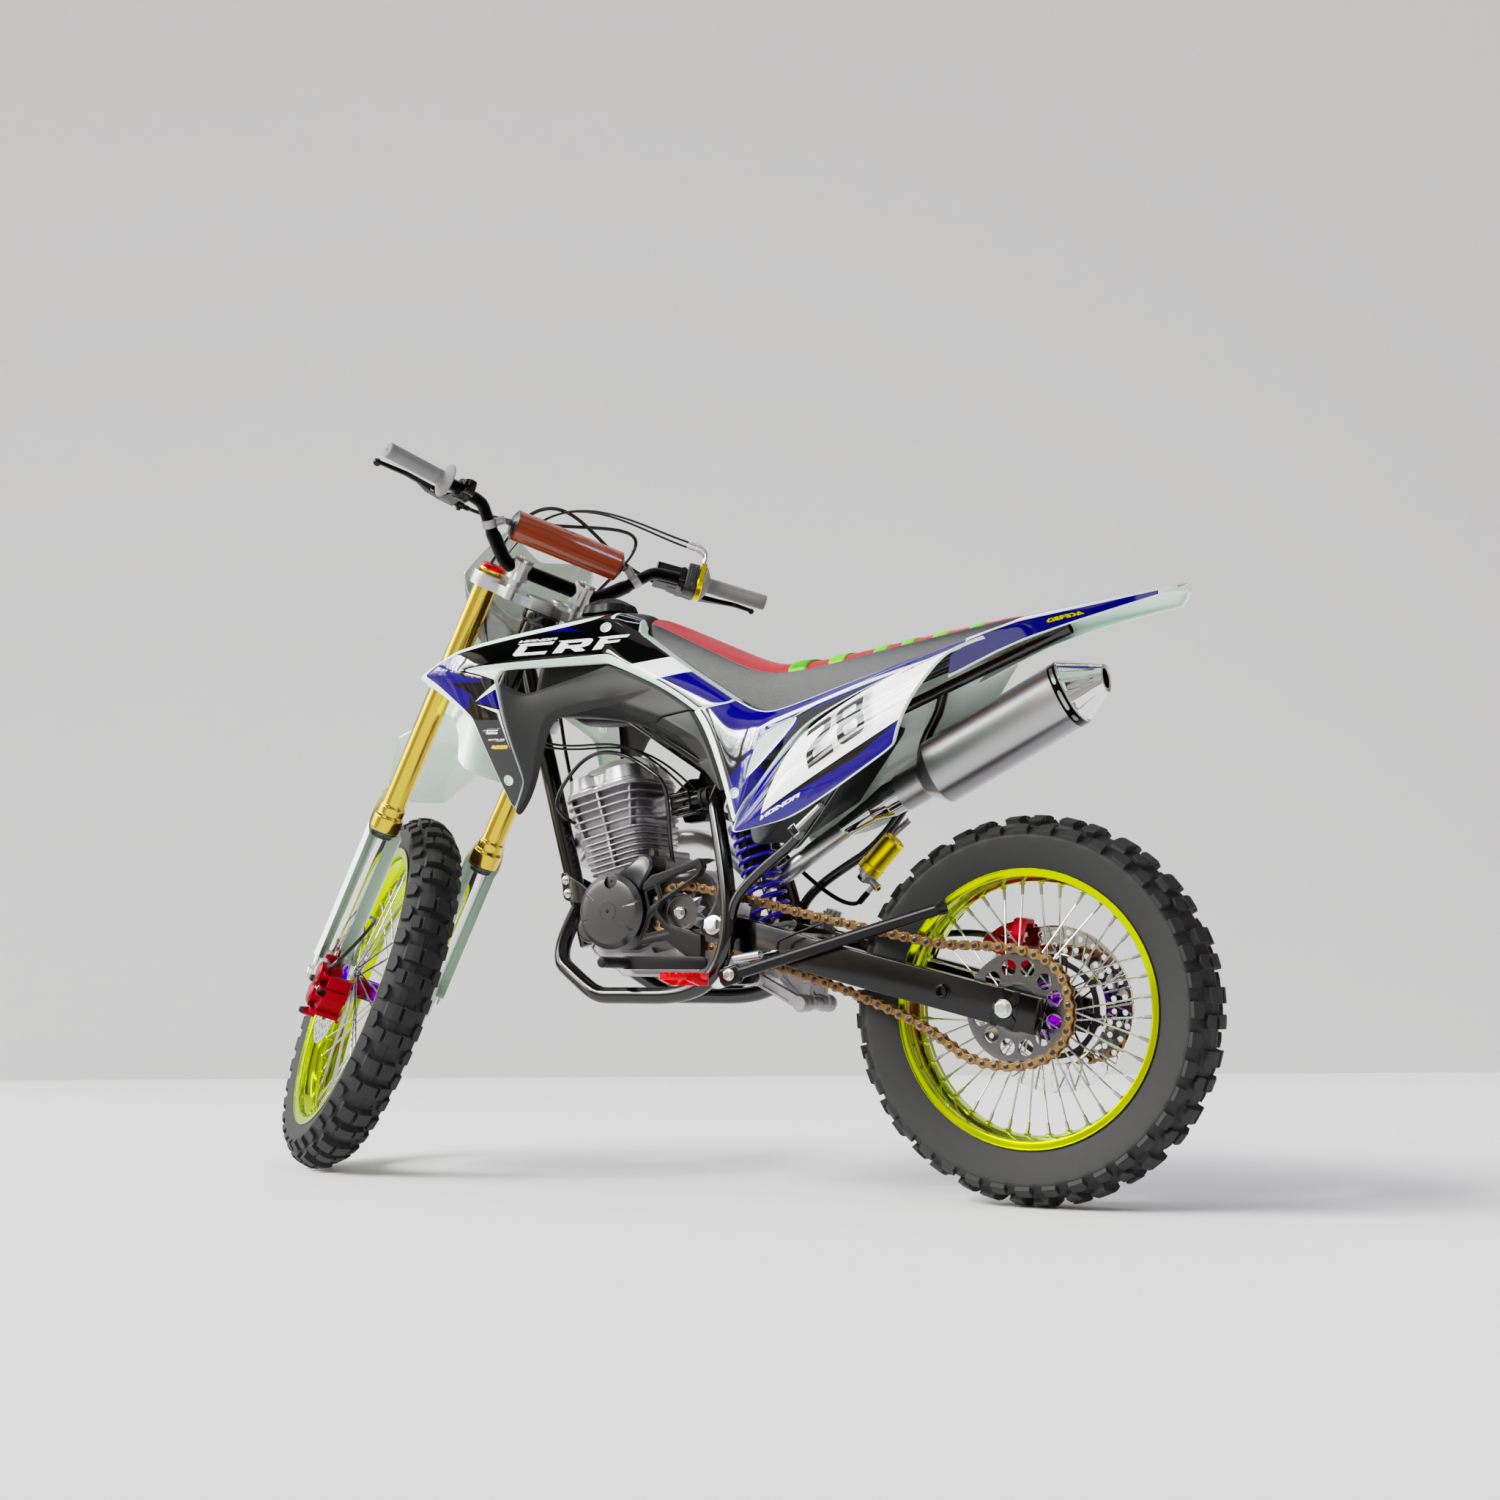 5 signs that CRF150L is the off-road bike designed to unlimit the